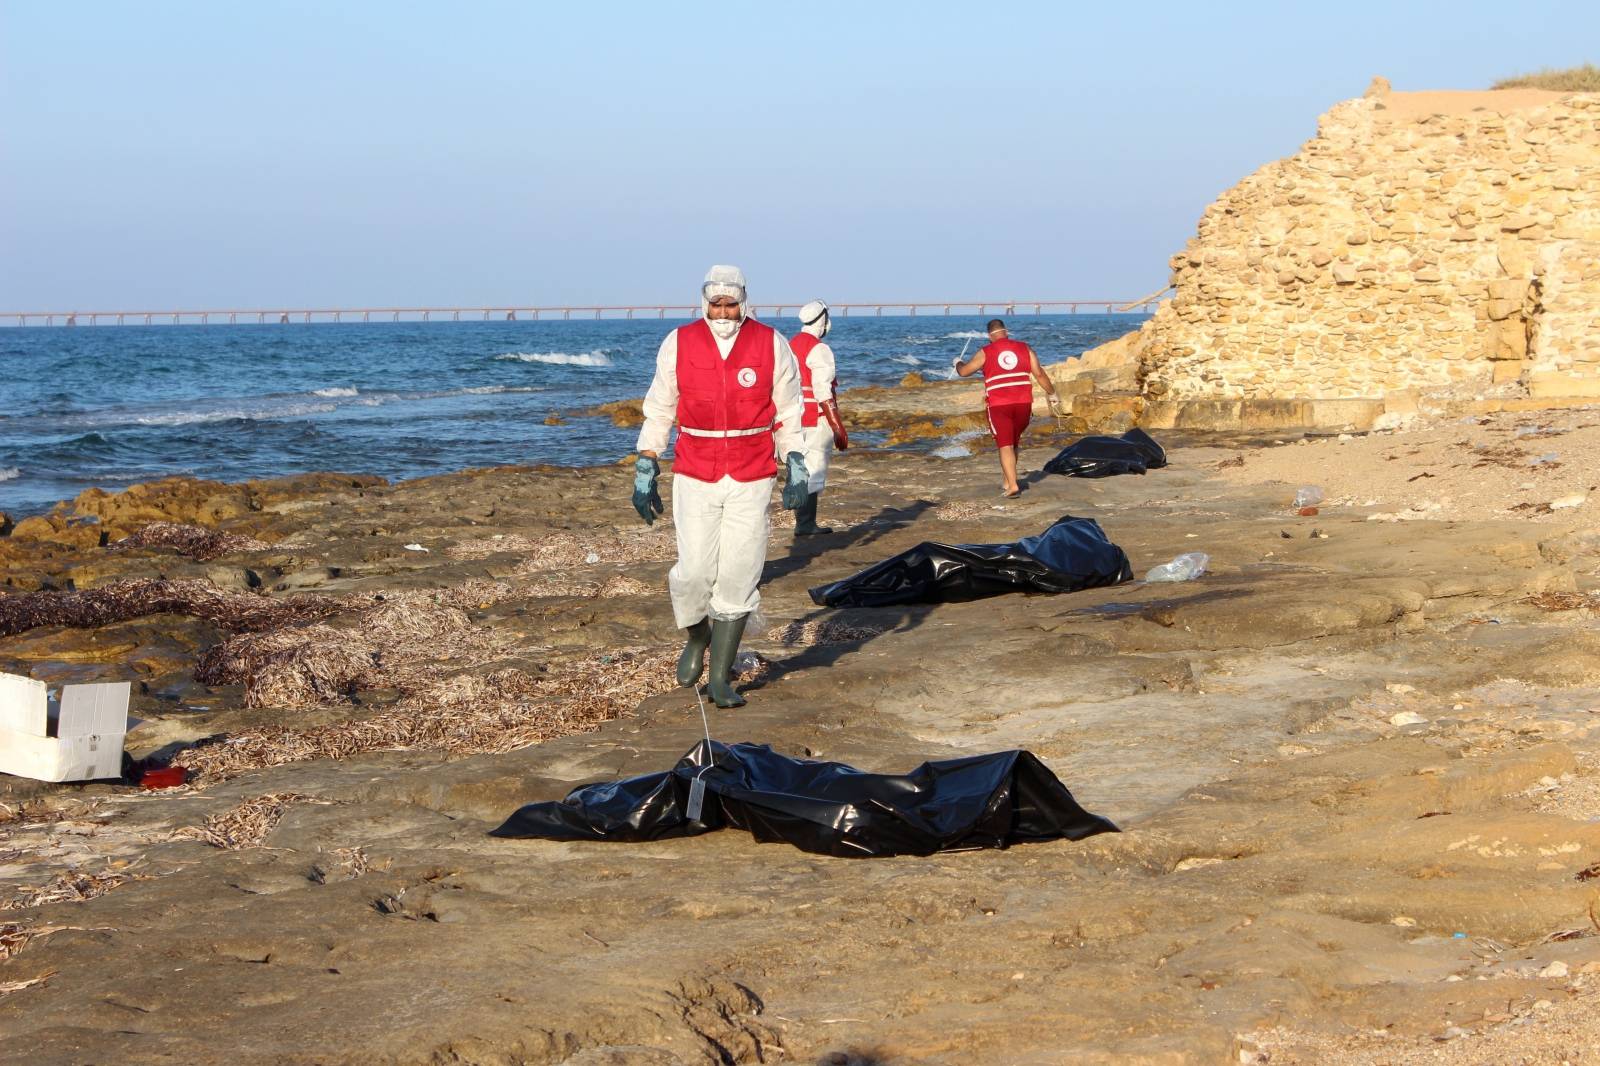 Libyan Red Crescent workers are seen near bags containing bodies of migrants, who died after their wooden boat capsized, in Khoms